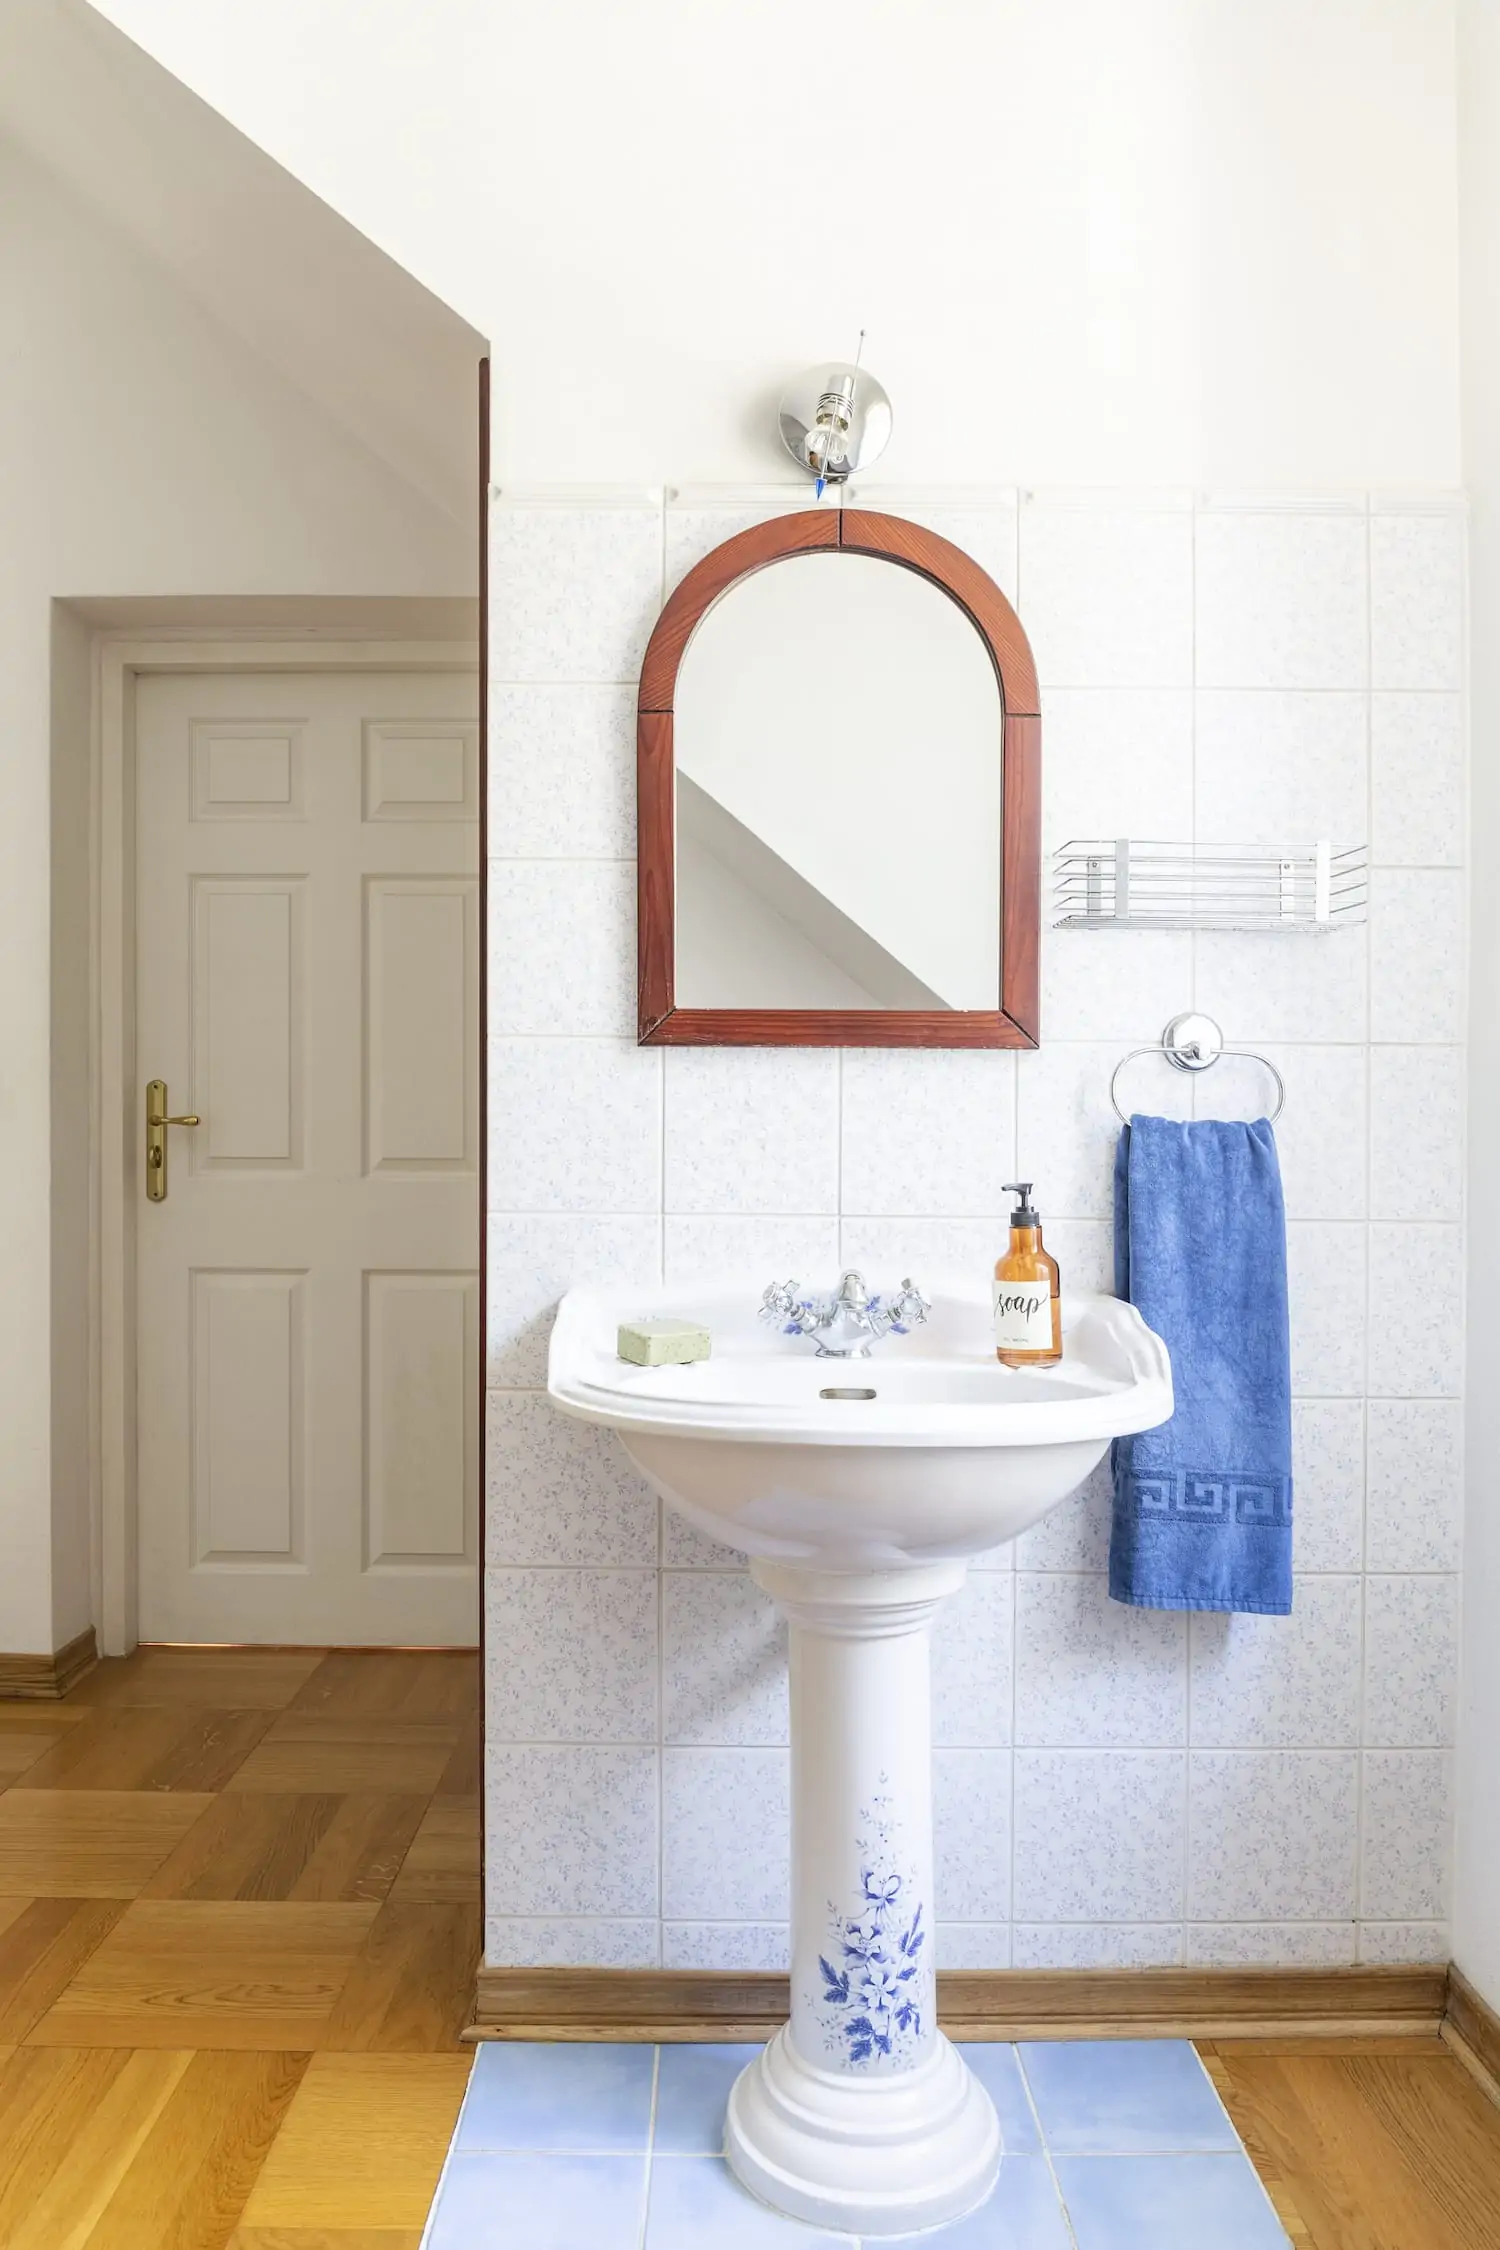 8 Bathroom Sink Types: Pros & Cons [Picture Guide]